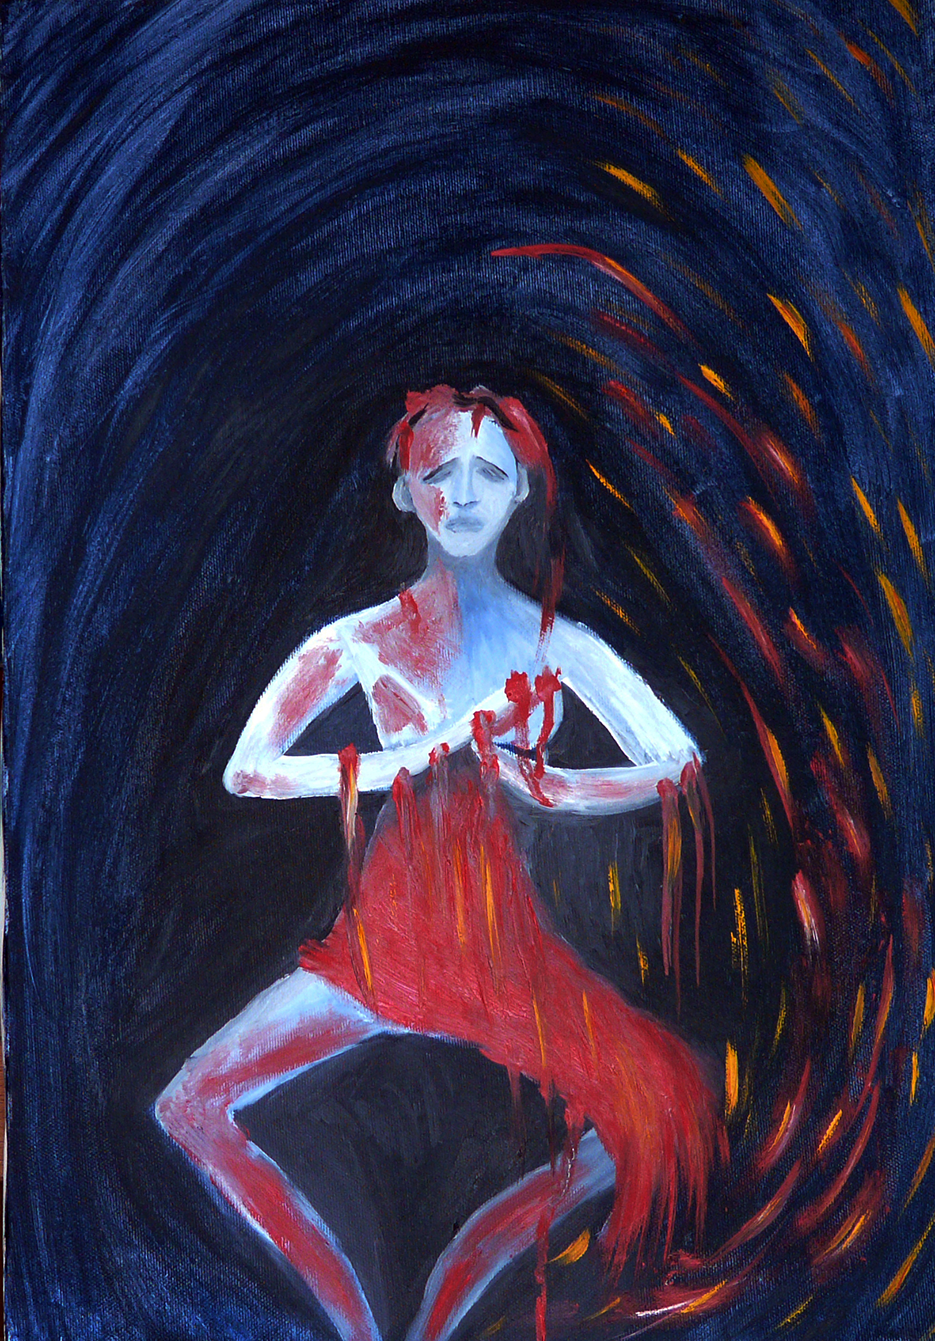 Pain (Paint inspired by poetry by Giulia Occorsio)